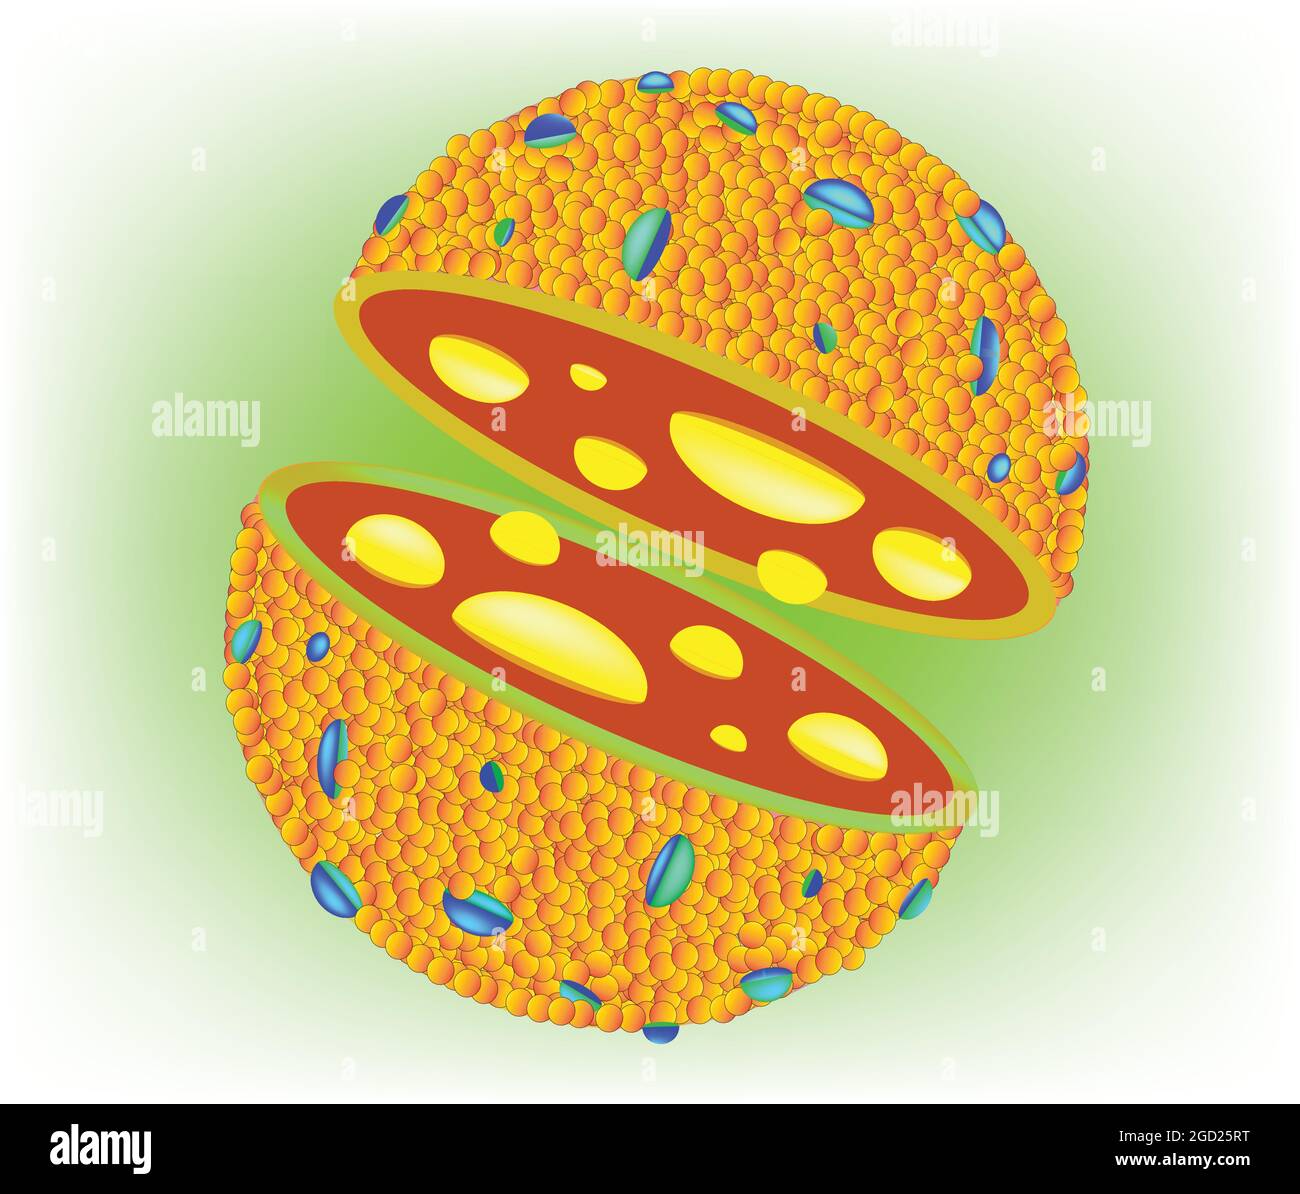 Biological anatomy of Lysosome, Cell lysosome structure with phospholipid bilayer, Structure of Lysosome Stock Vector